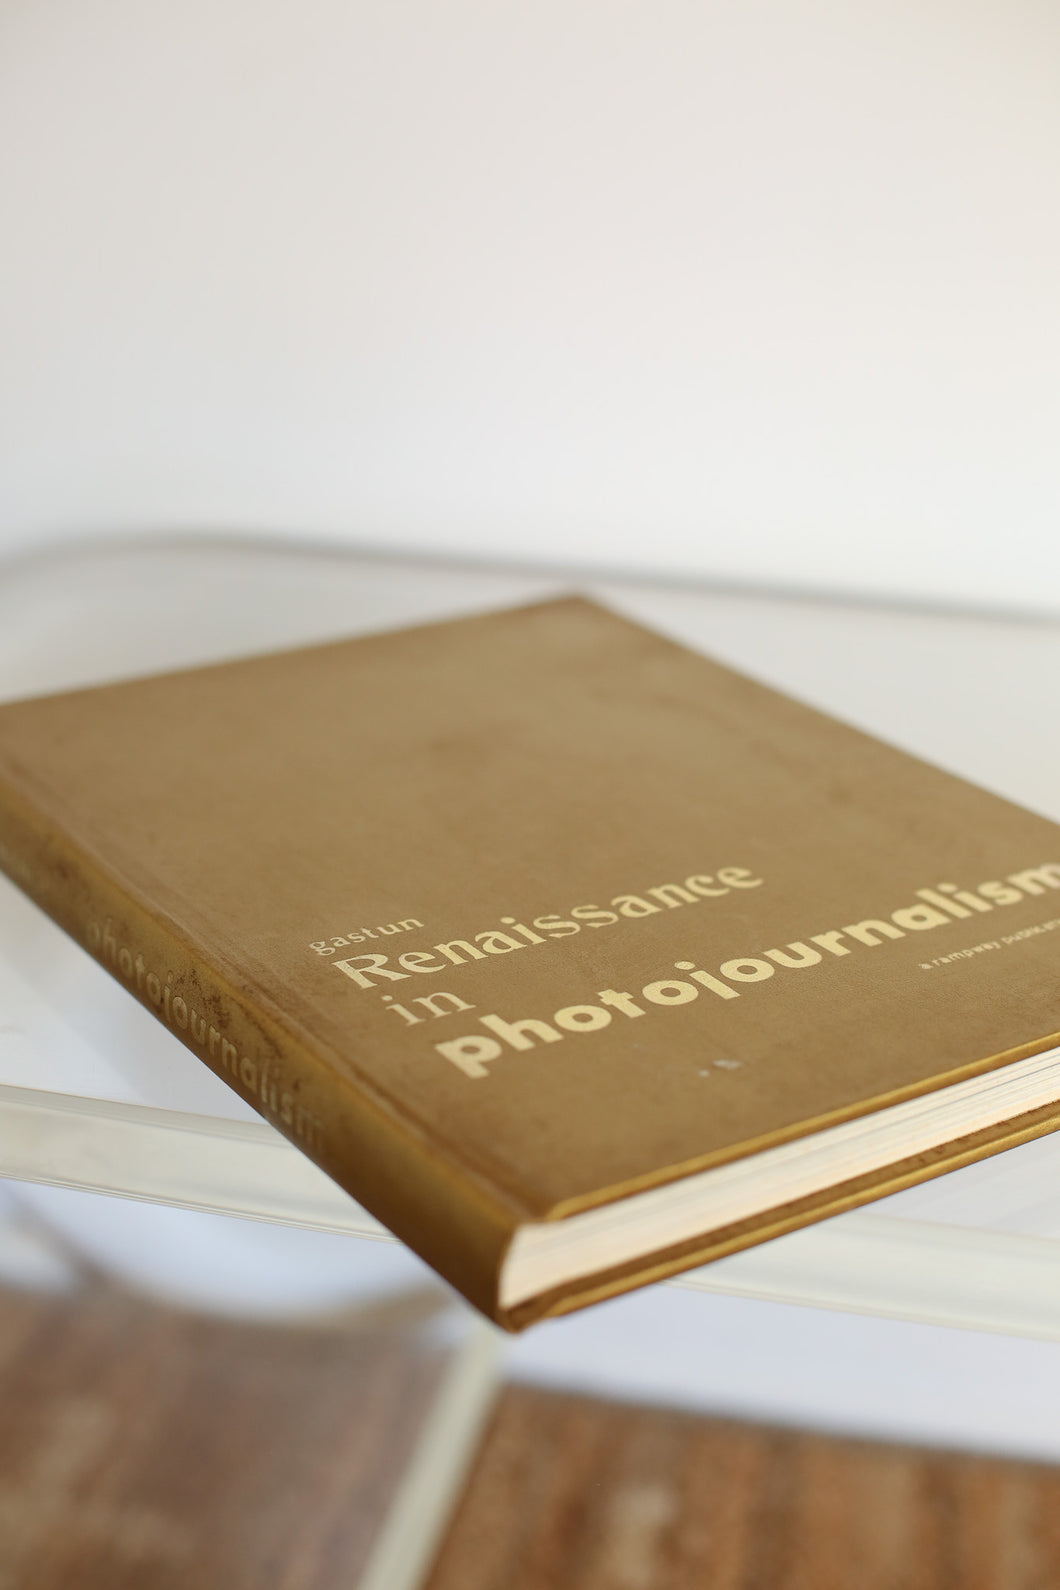 Renaissance in Photojournalism Coffee Table Book